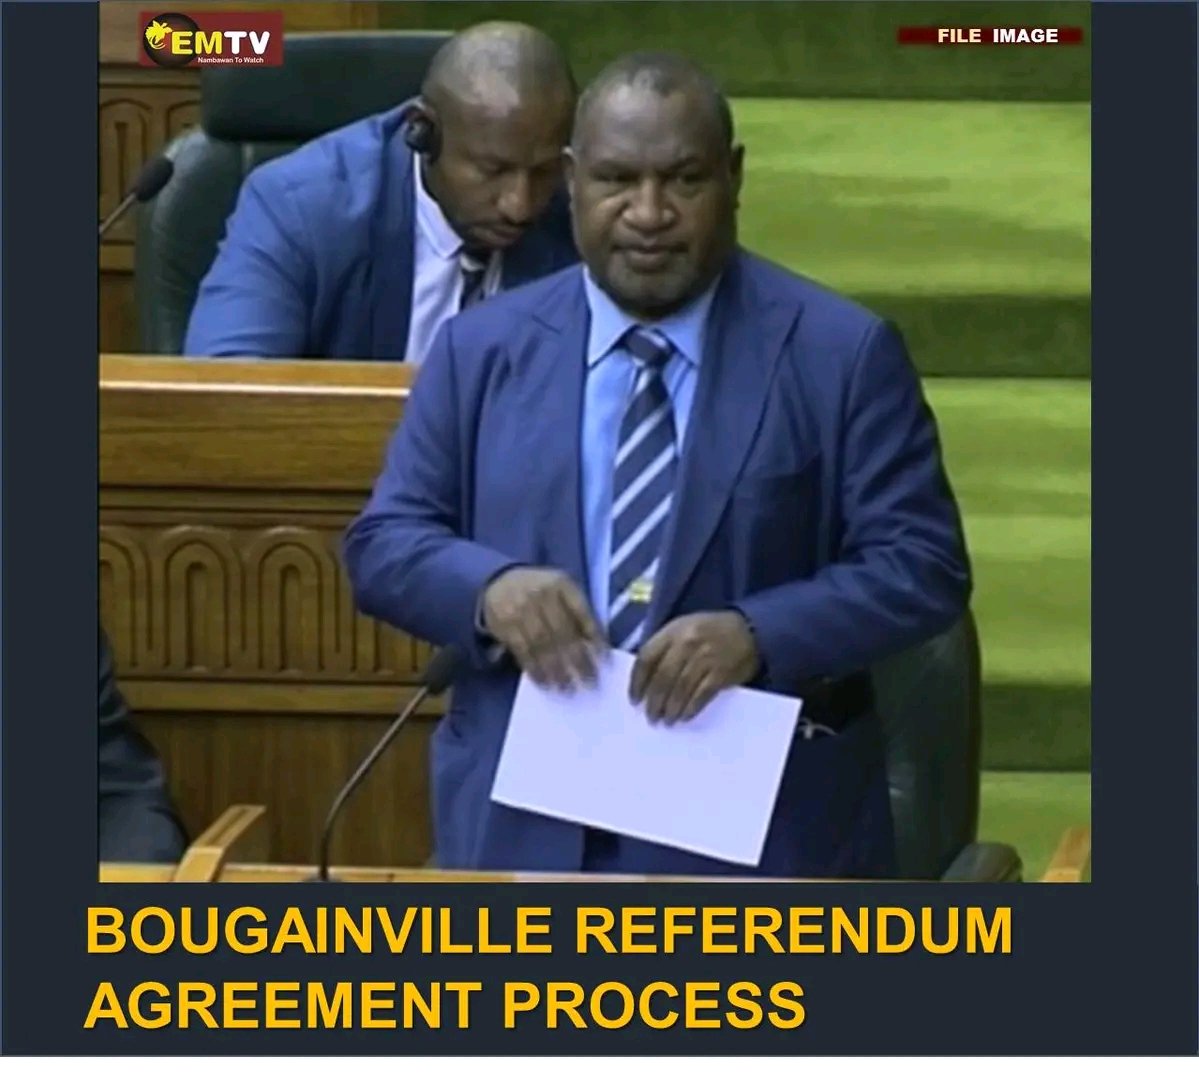 Prime Minister James Marape has assured the people and leaders of Bougainville that the agreement to progress the 2019 Referendum results has not been abandoned as it will be discussed in Parliament.

Read more on: emtv.com.pg/bougainville-r…

#EMTVOnline #EMTVNews